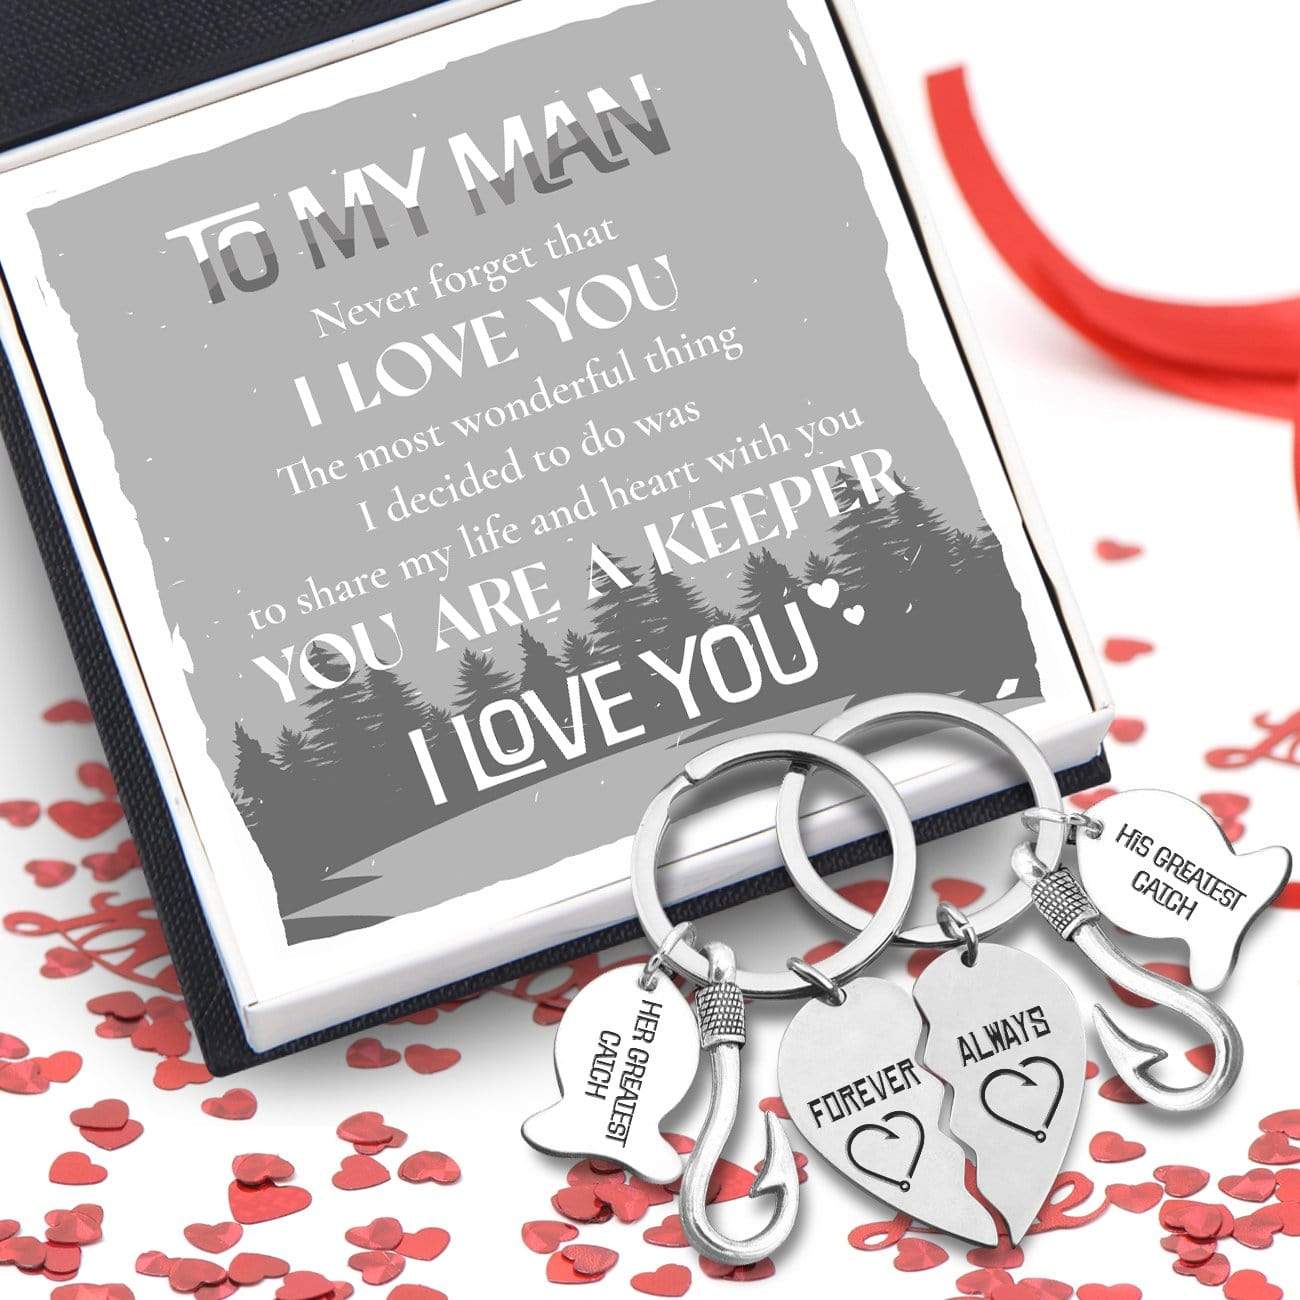 Fishing Heart Puzzle Keychains - To My Man - Never Forget That I Love You - Gkbn26005